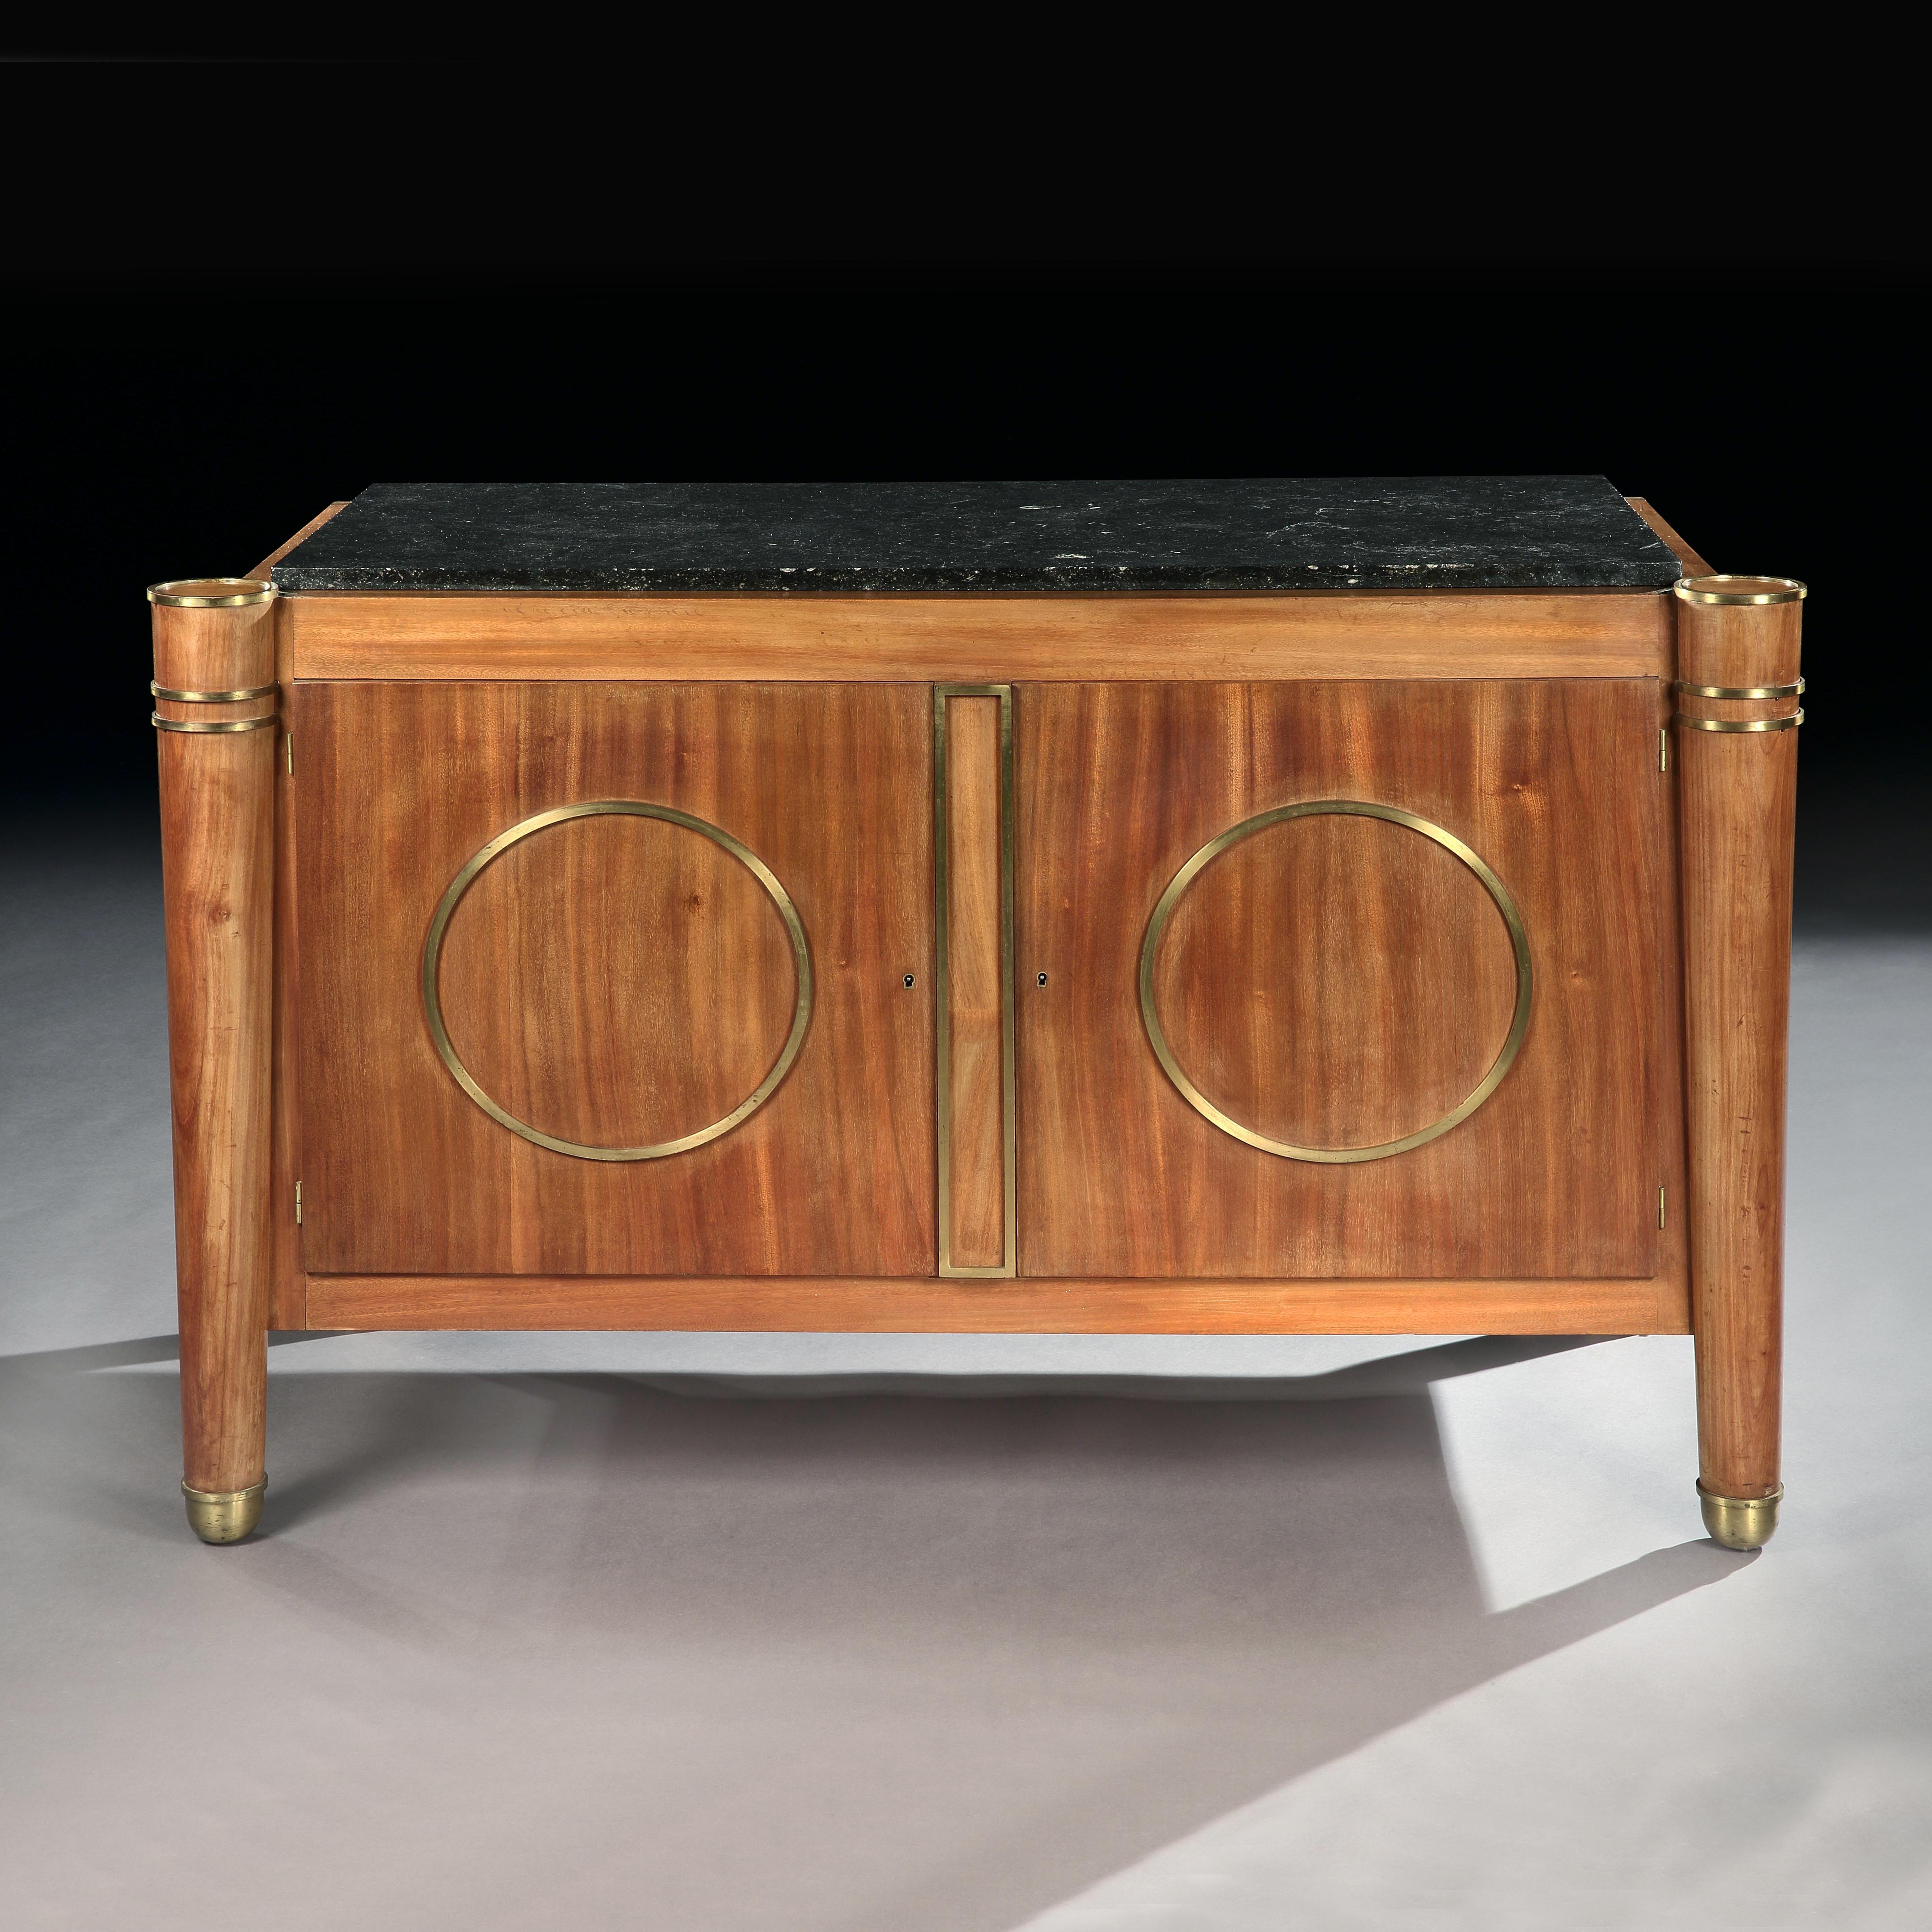 A very elegant French 1940s Mid-Century Modernist fossil marble-topped commode in the style of Jules Leleu.

French, circa 1940

Of chic design, drawing from the early 19th century Greco-Roman inspired Empire patterns, this wonderful commode